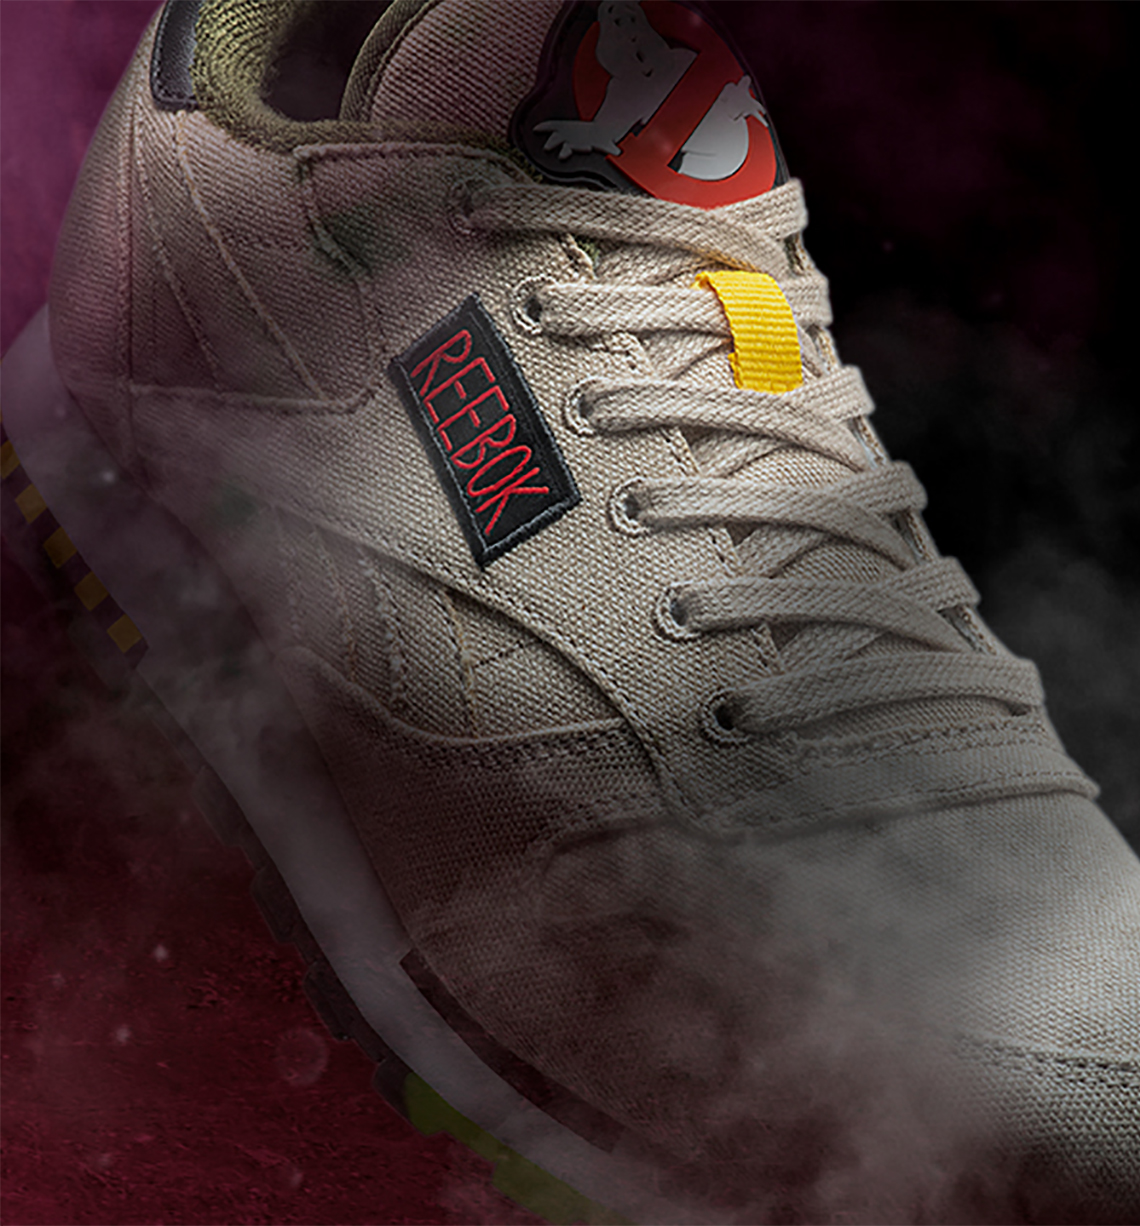 Ghostbusters Reebok Classic Leather H68139 4